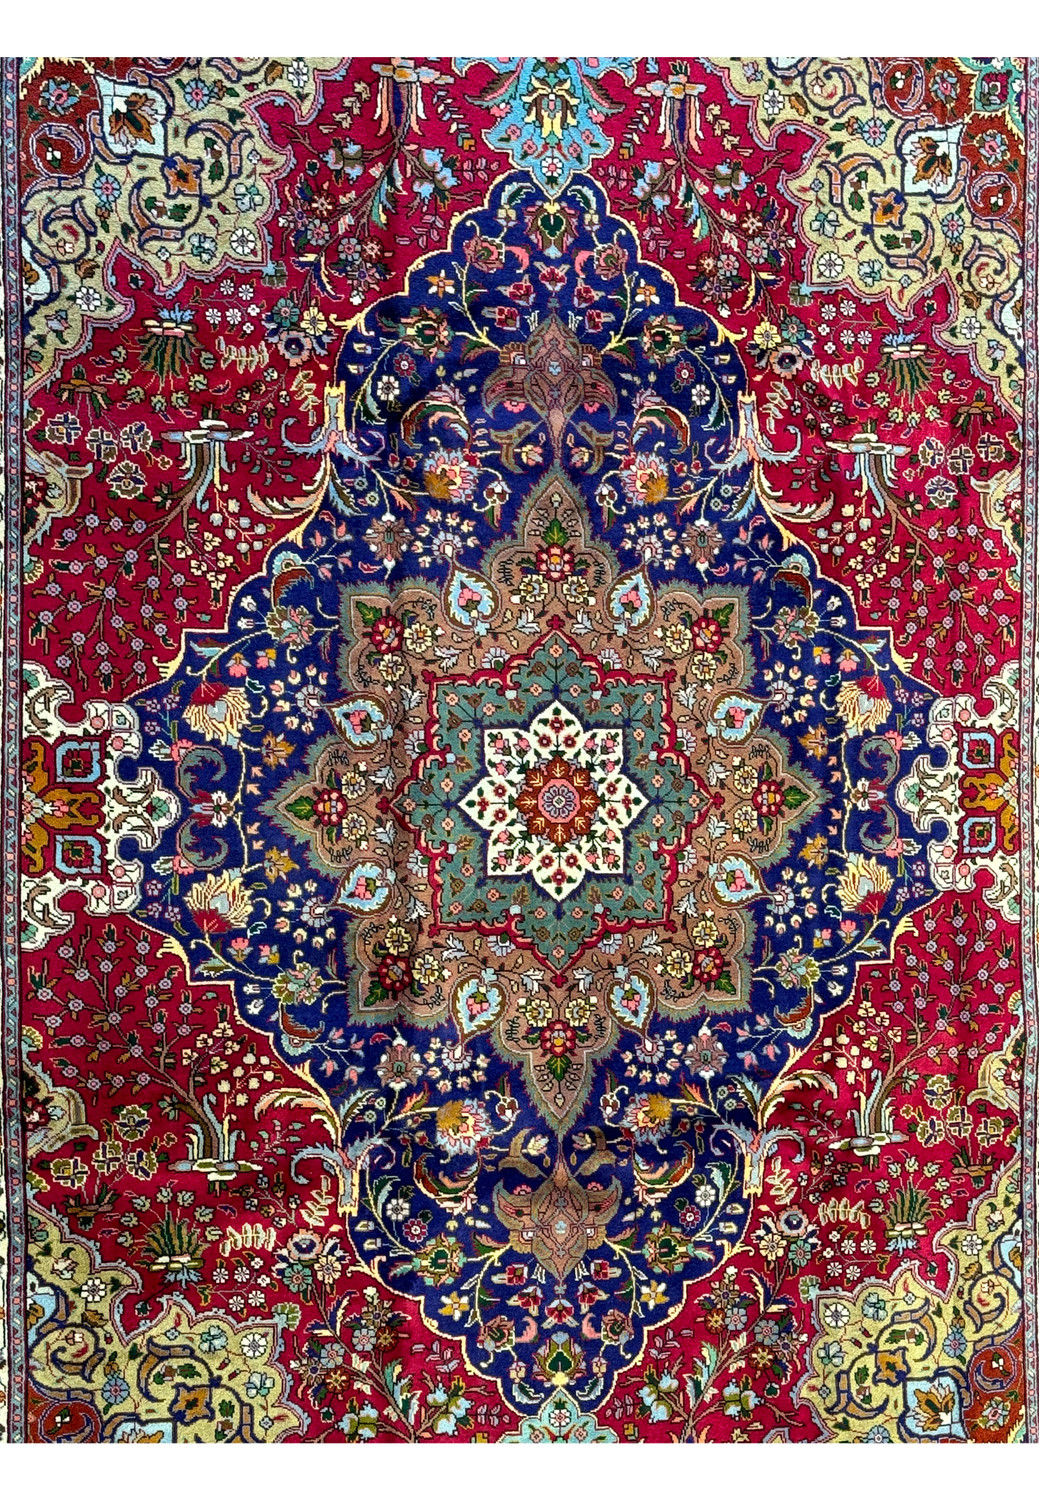 Detail shot of the Persian Geometric Tabriz Rug's border showcasing the fine craftsmanship and array of colors in the smaller medallions and floral designs